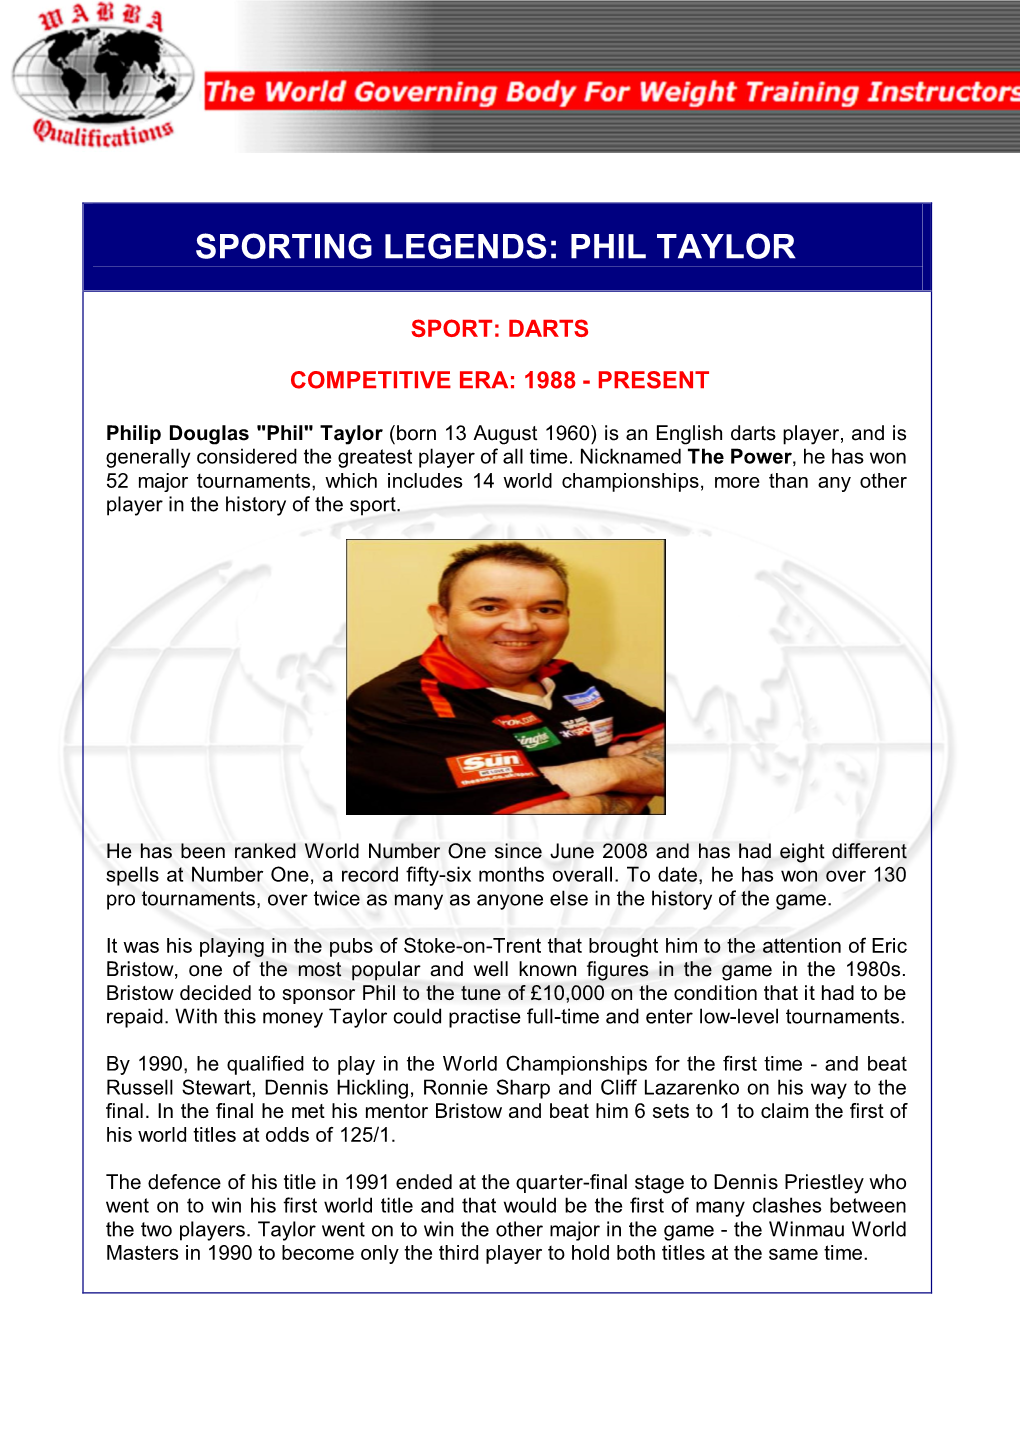 Sporting Legends: Phil Taylor